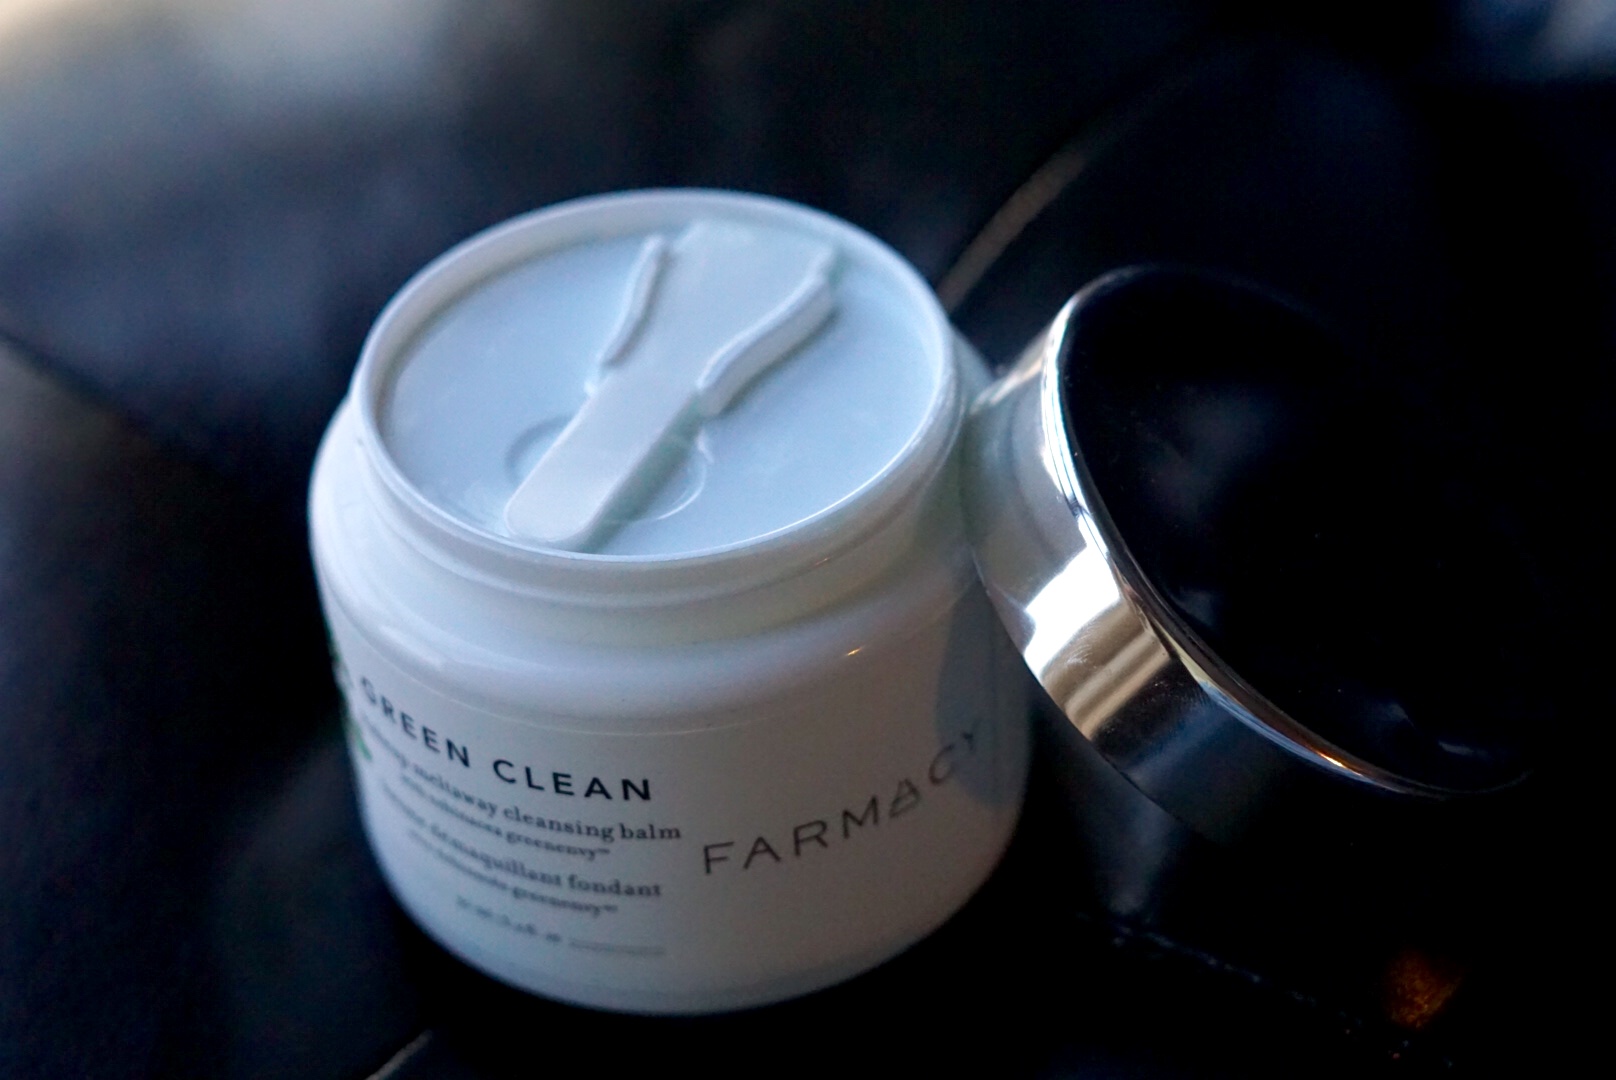 FARMACY Green Clean Makeup Removing Cleansing Balm